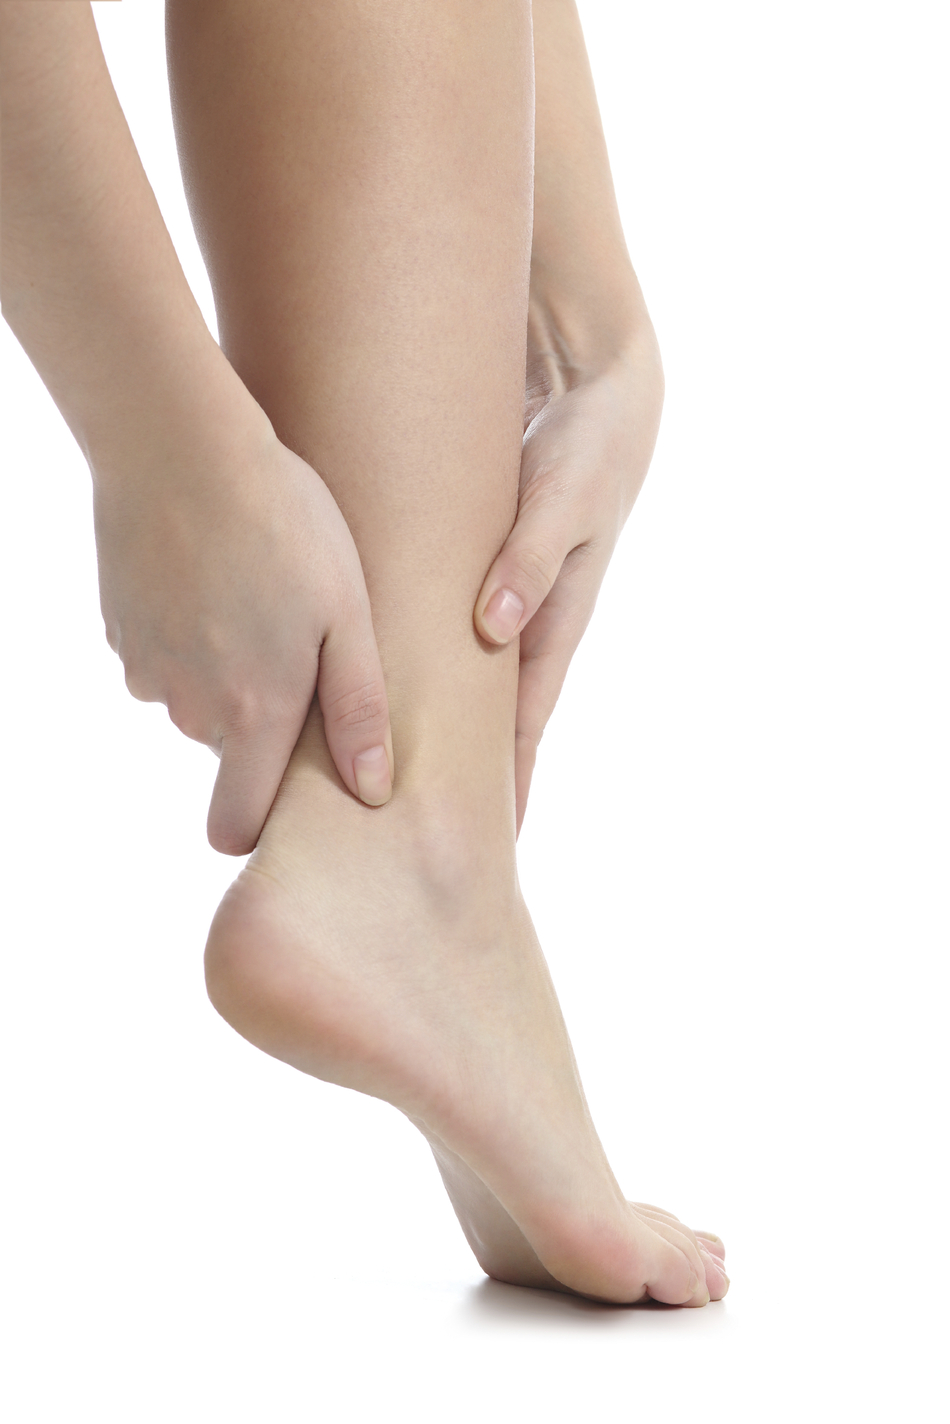 An Active Lifestyle Could Lead to Ankle Arthritis